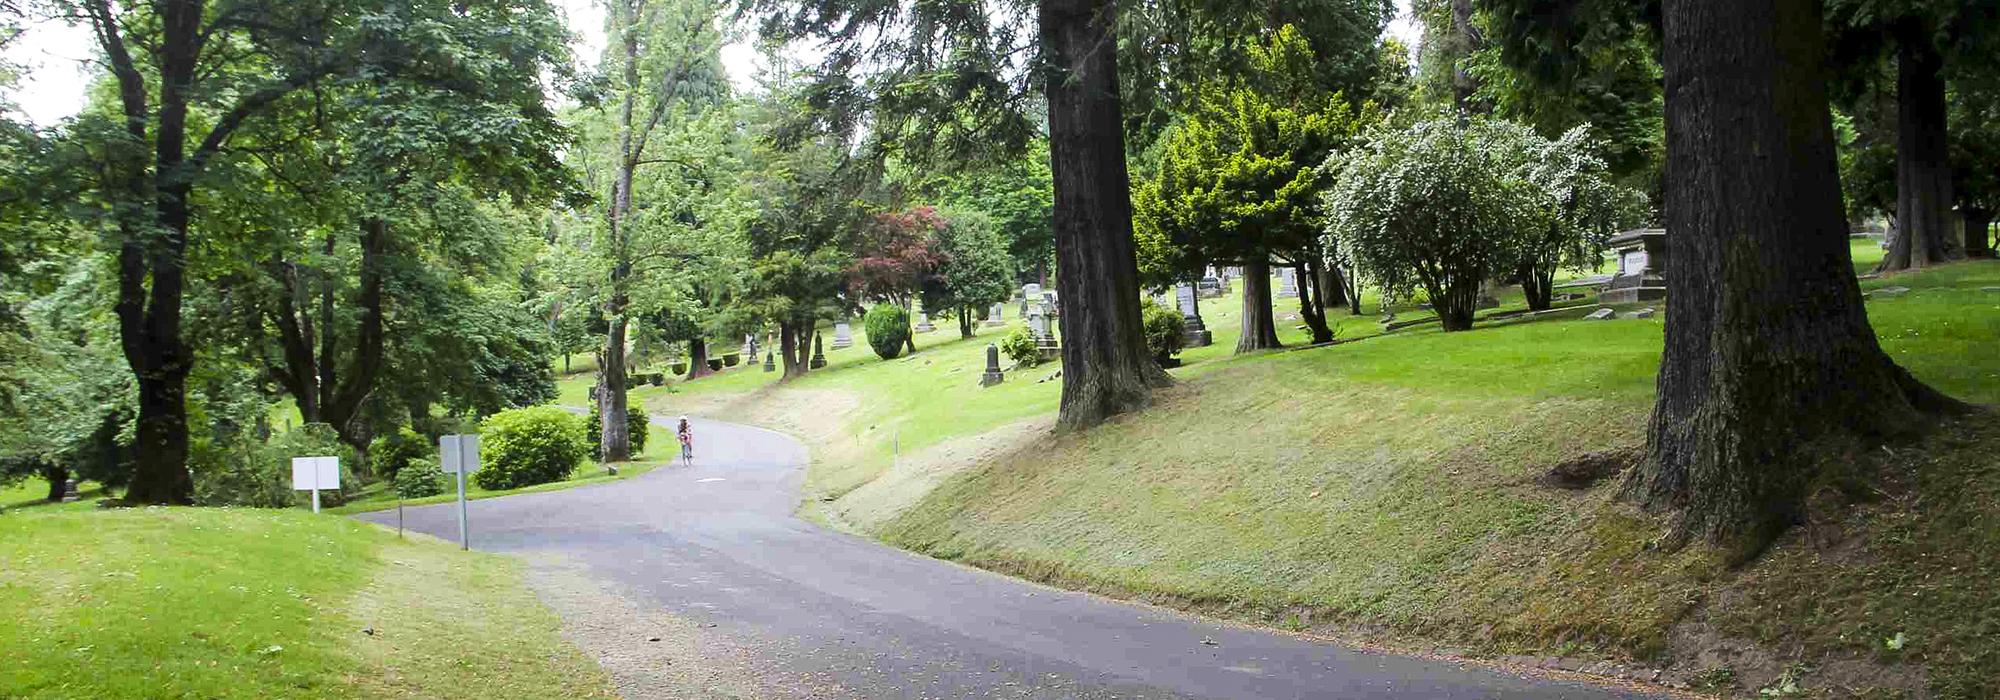 River View Cemetery, Portland, OR